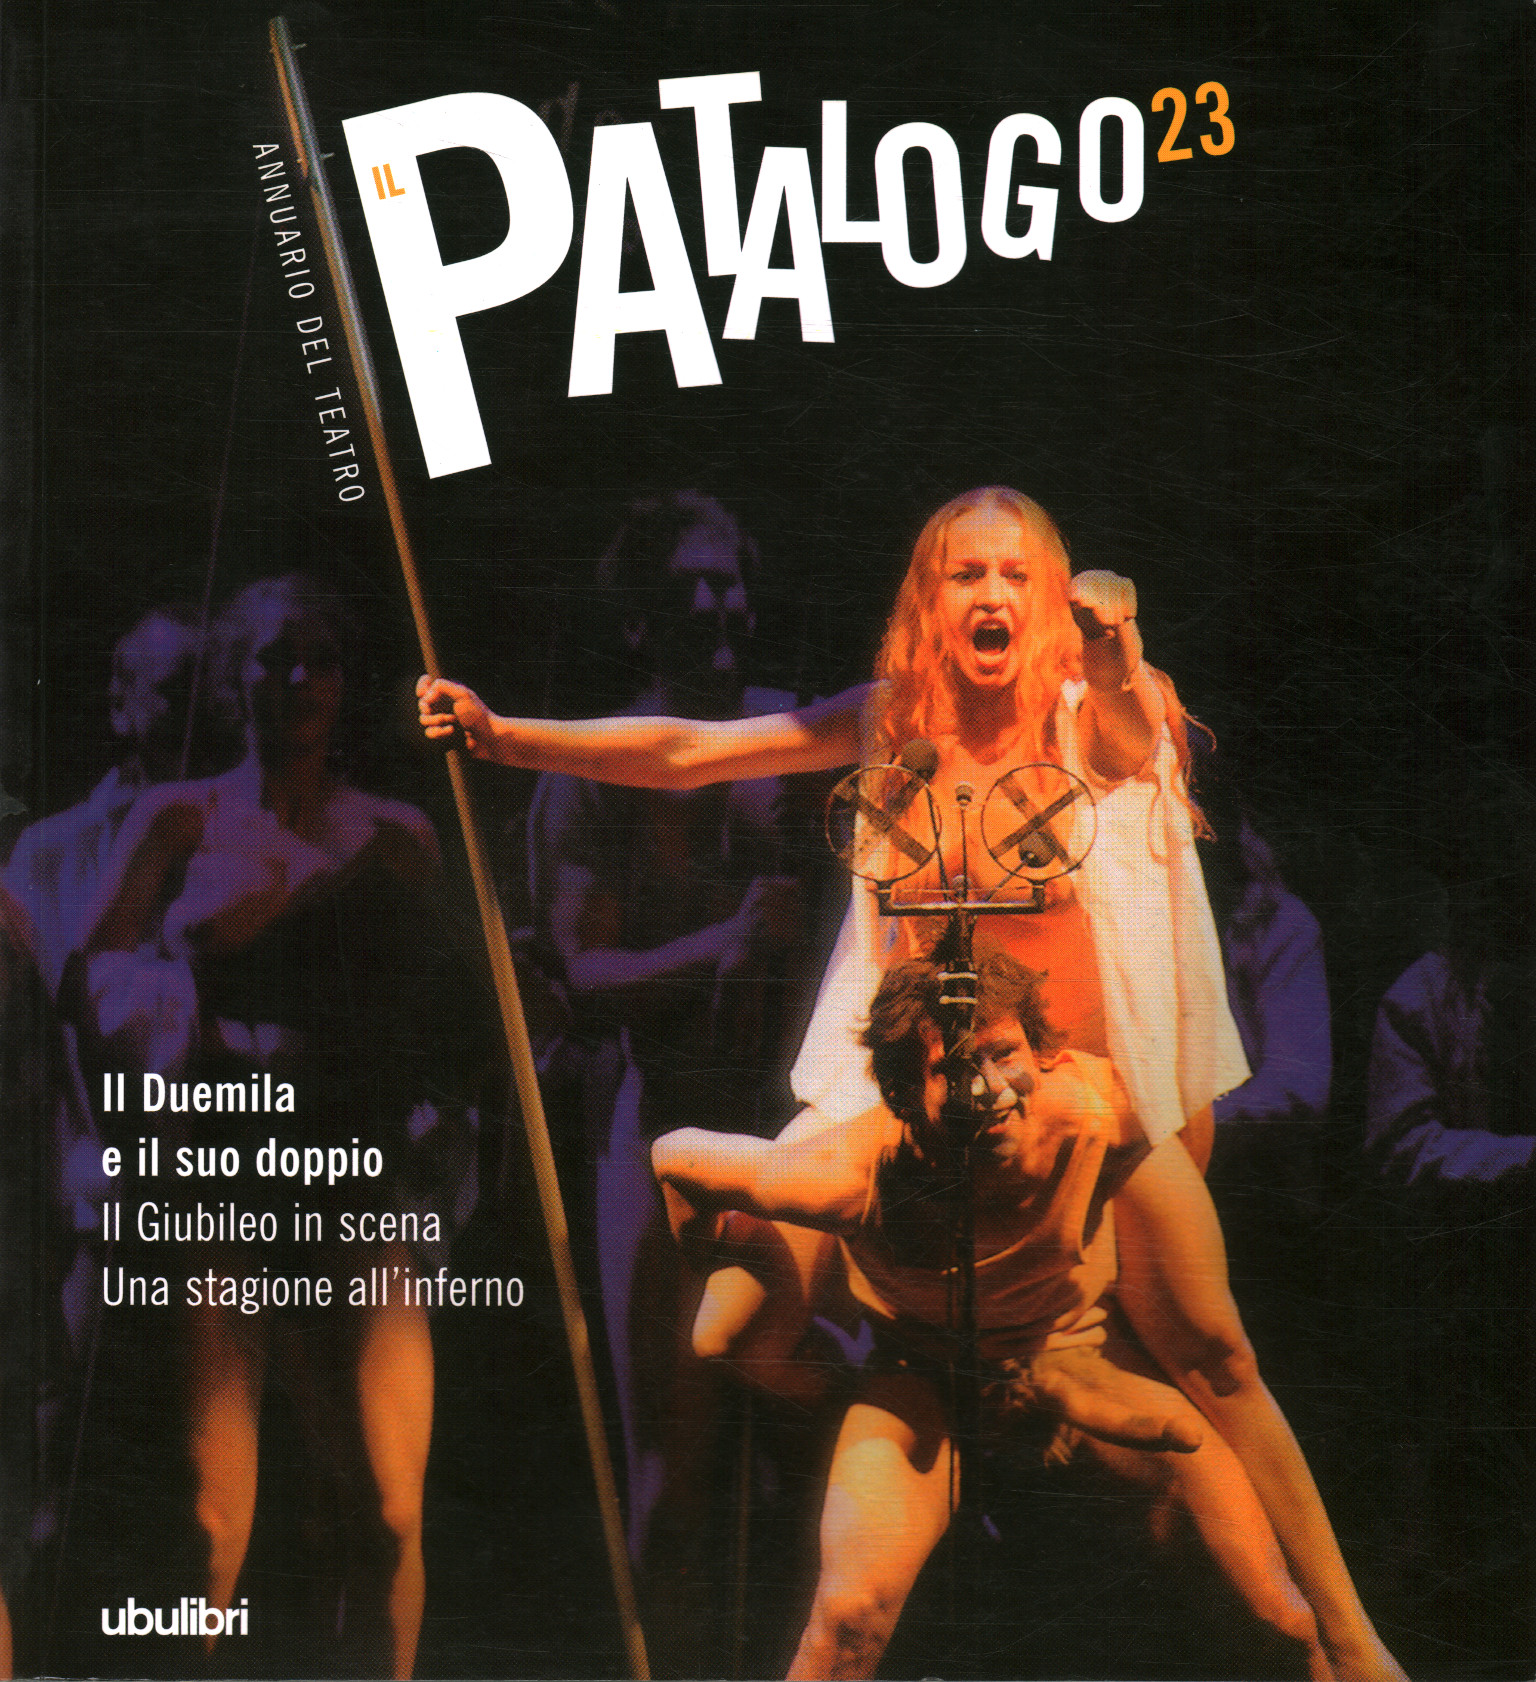 The Pathologist 23. The 2000s and its%, The Pathologist 23. The 2000s and its%, The Patalogo 23. The 2000s and its%, The Patalogo twenty-three. The year 2000 and %, Il Patalogo twenty-three. The year two thousand and the%